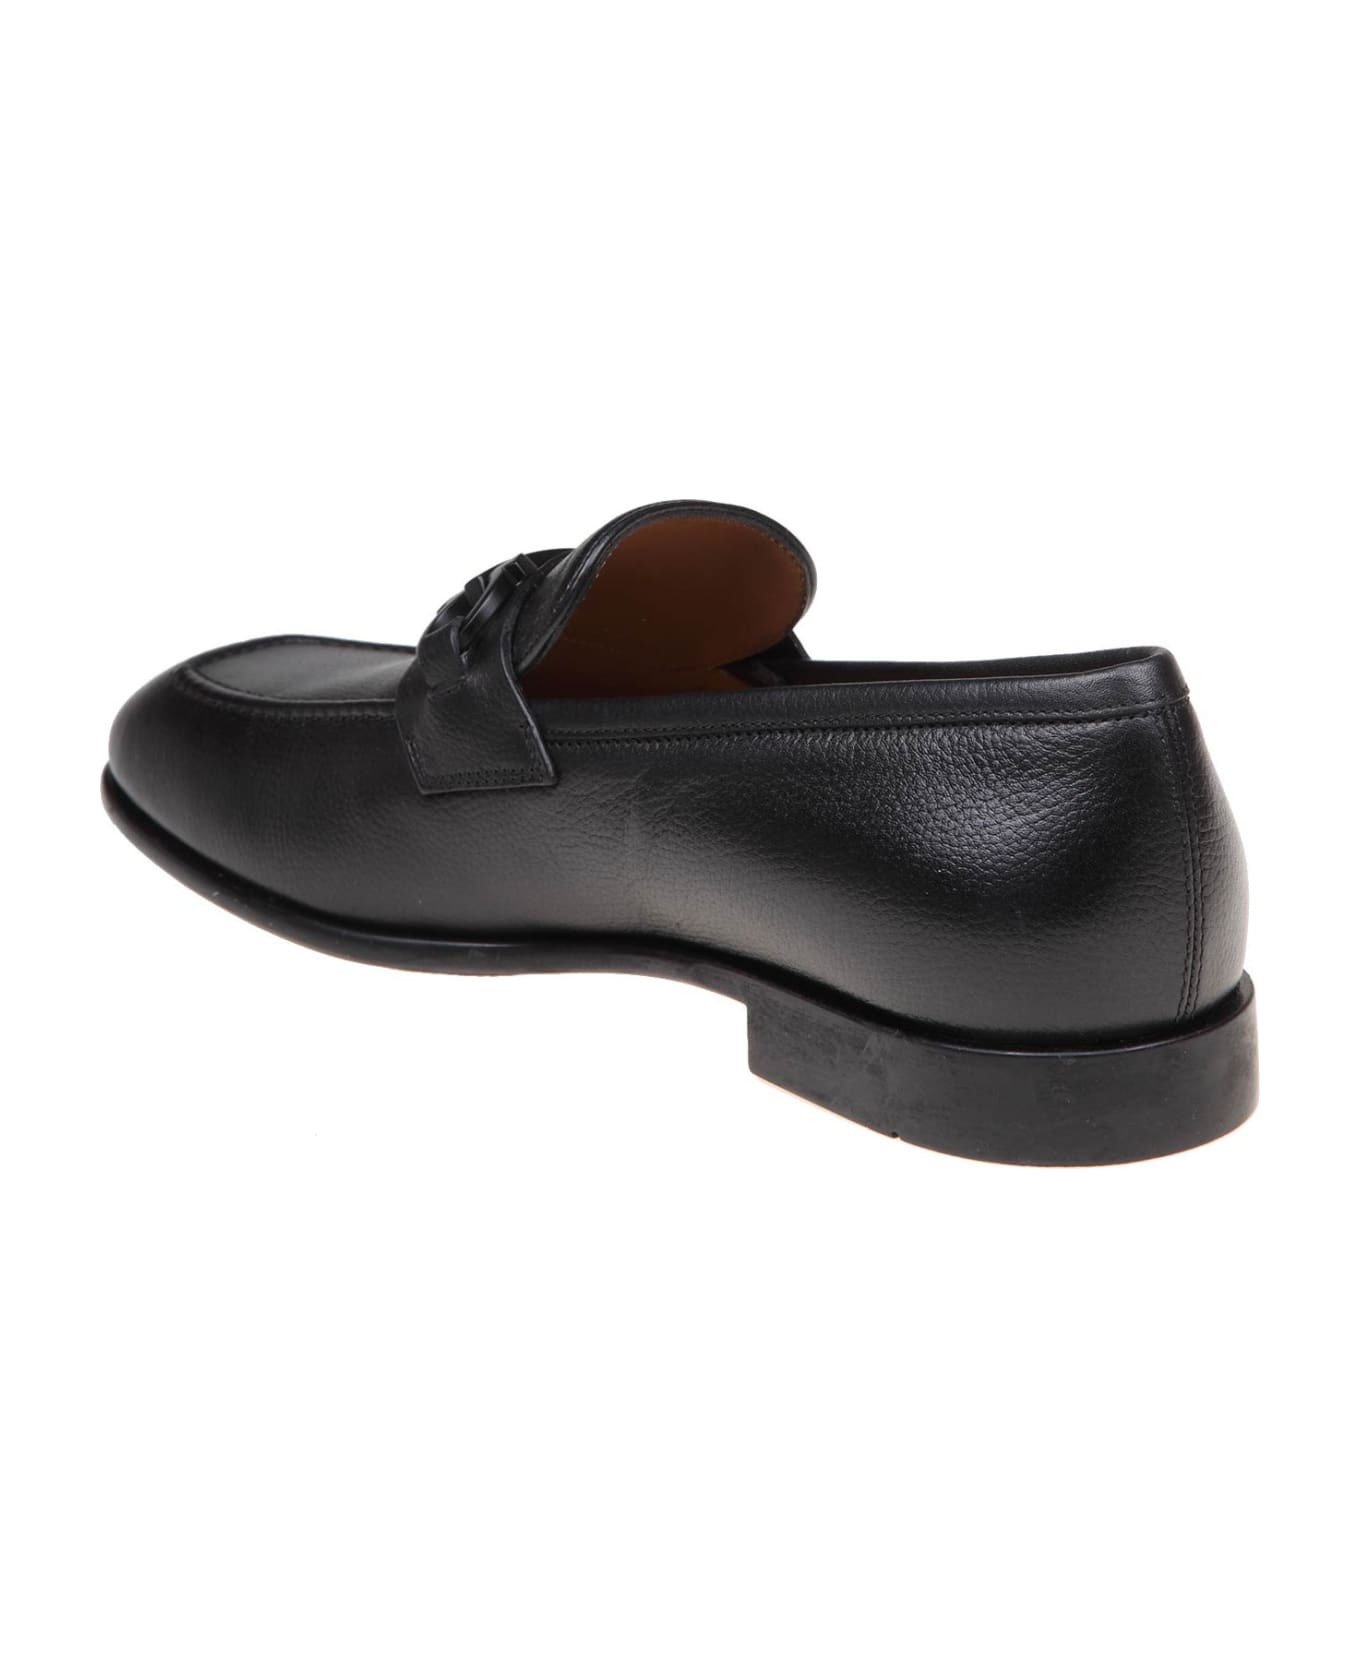 Ferragamo Leather Loafers With Gancini Buckle - Black